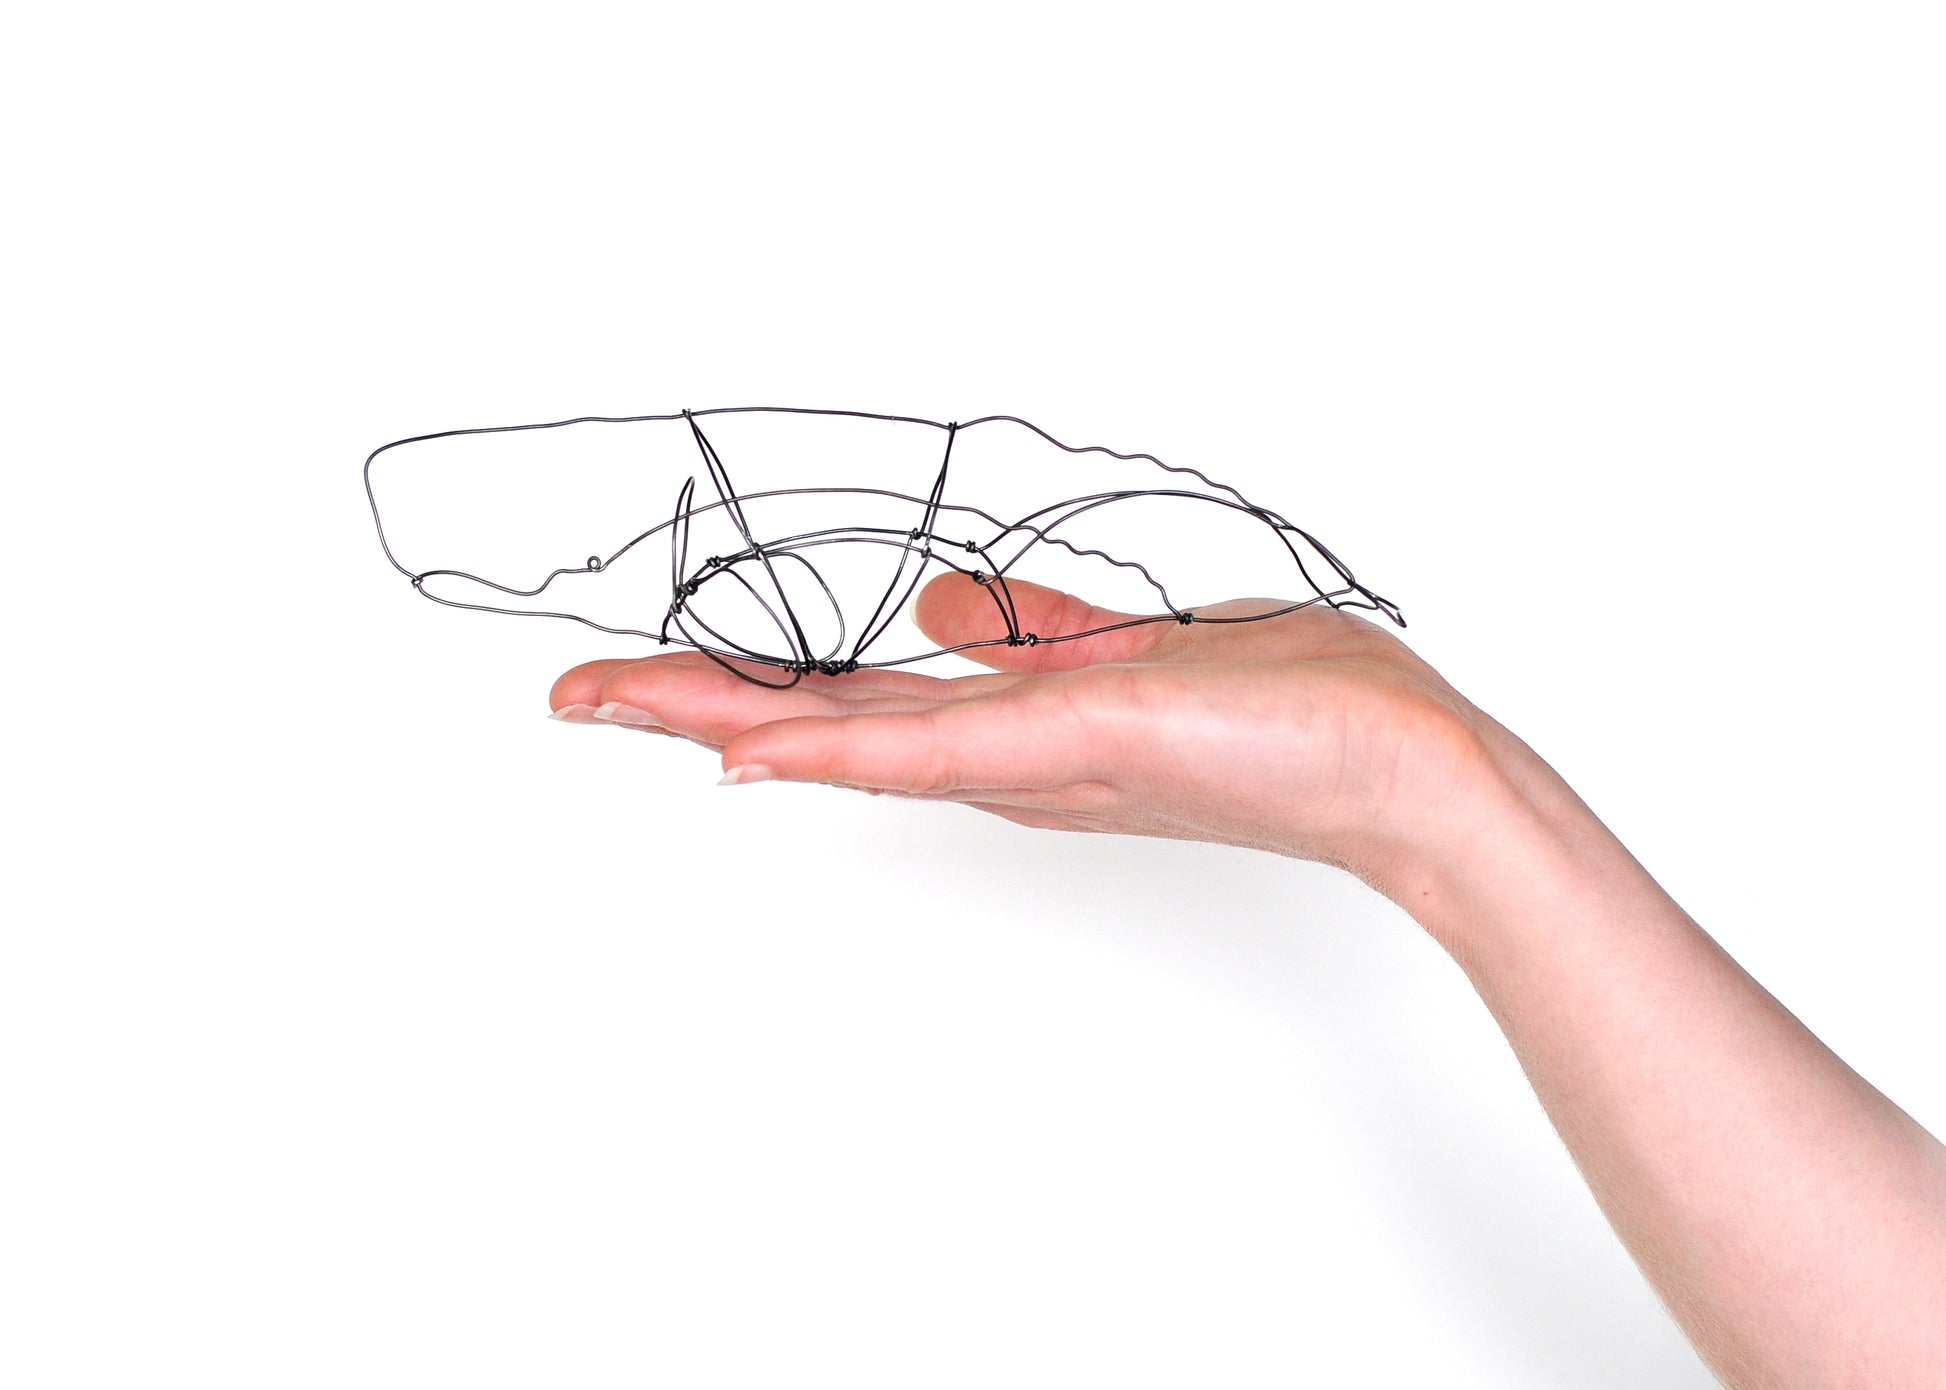 Photo of a 3D wire sperm whale sculpture held in a hand.